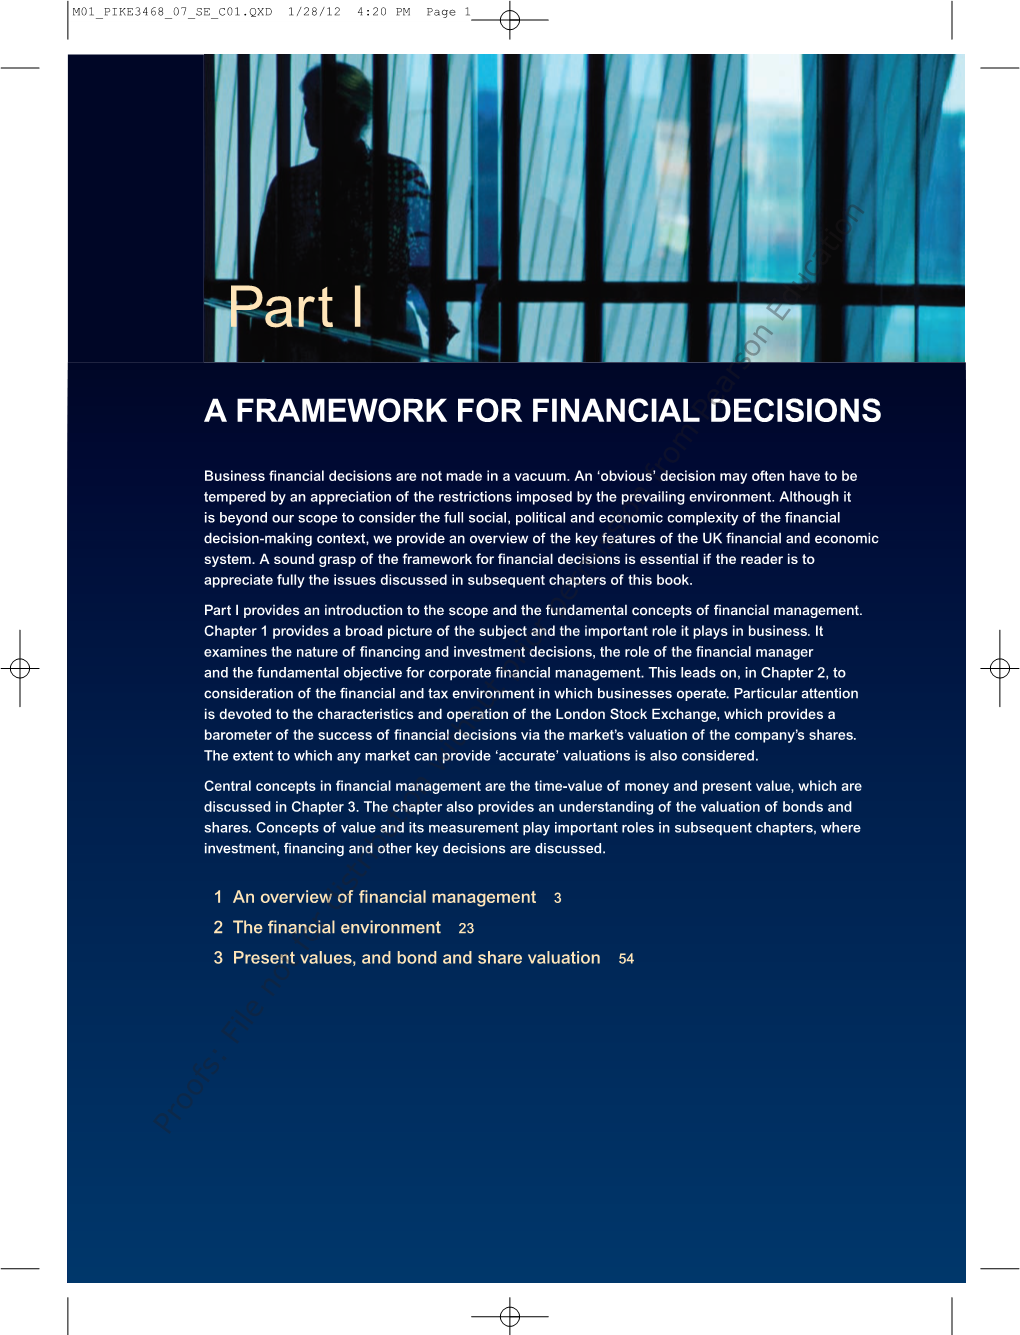 An Overview of Financial Management 3